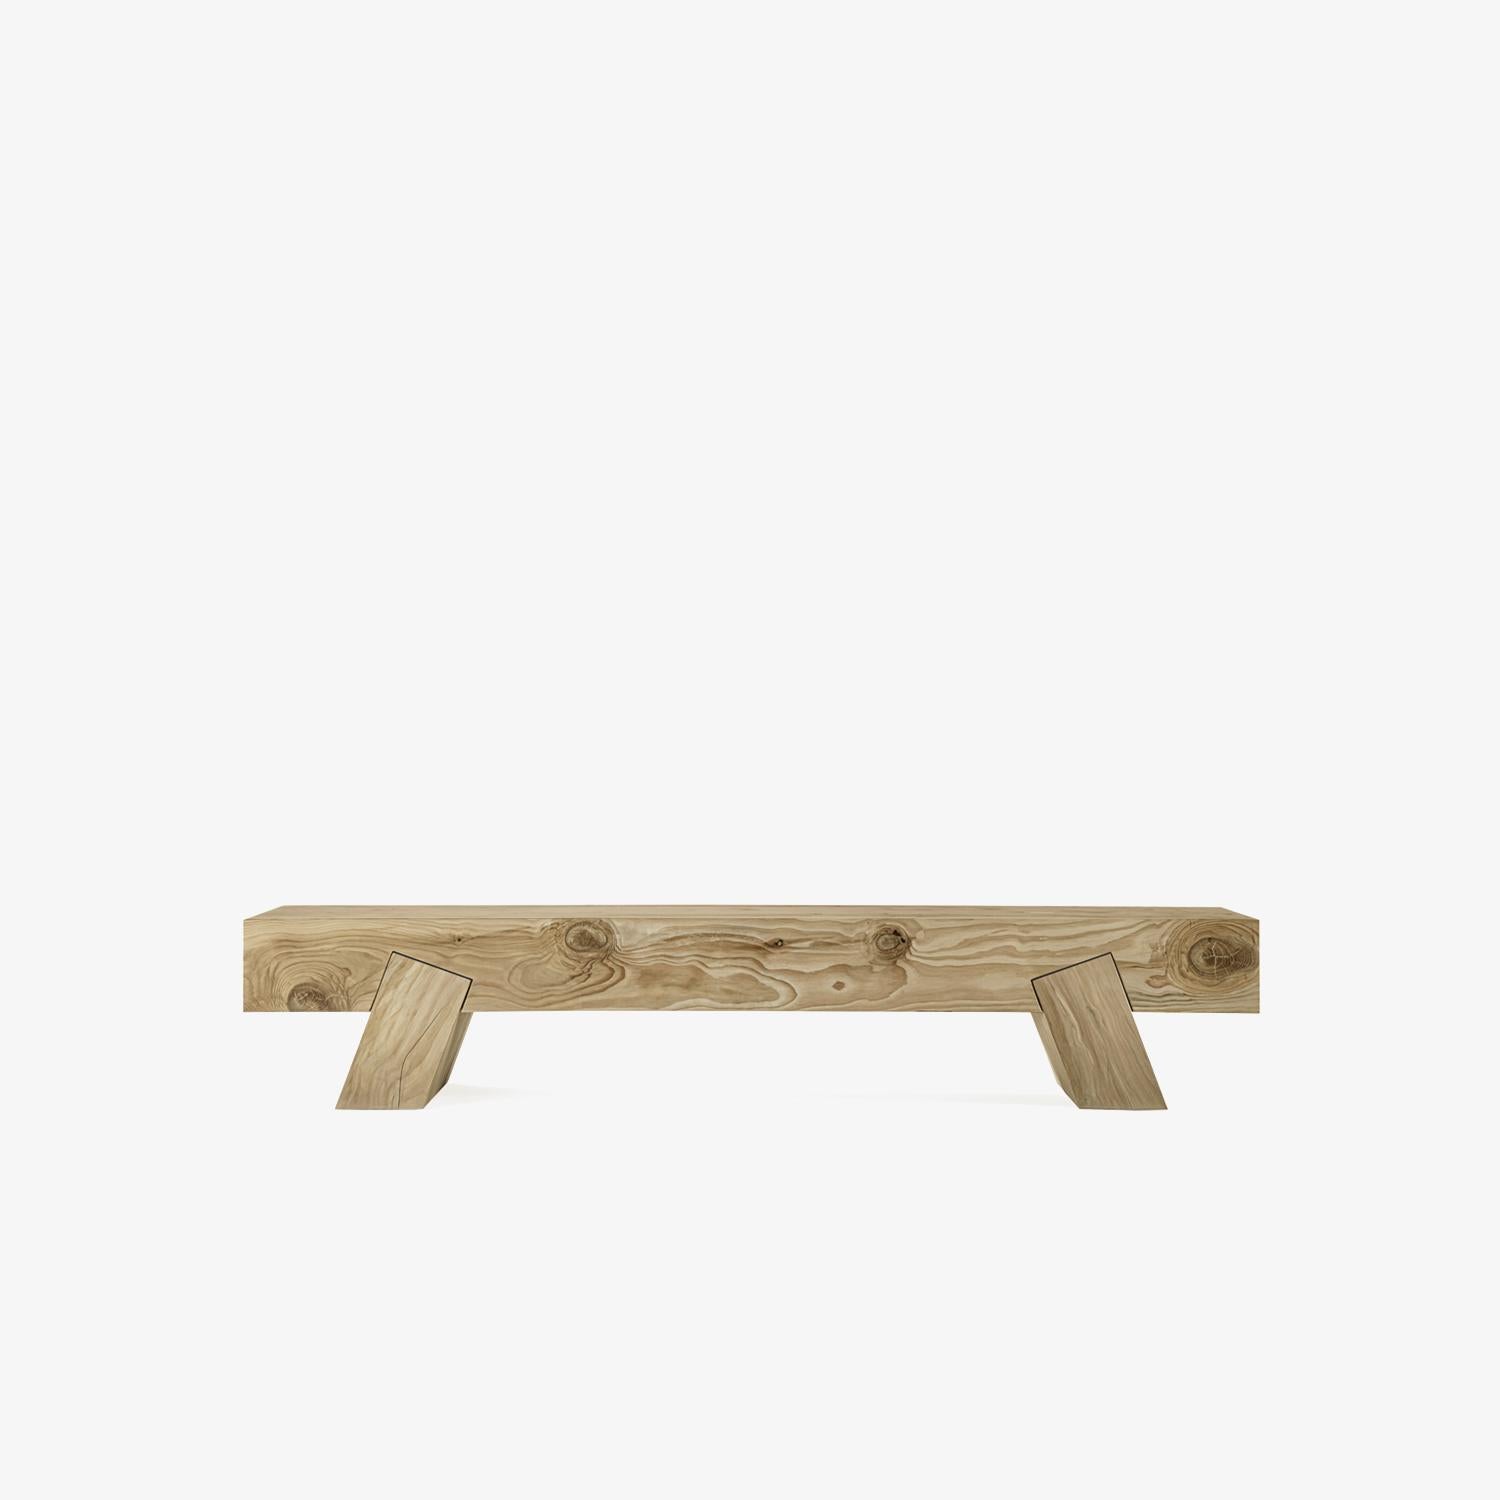 Modern Outdoor Bench Crafted From Solid Block of Scented Cedar Wood For Sale